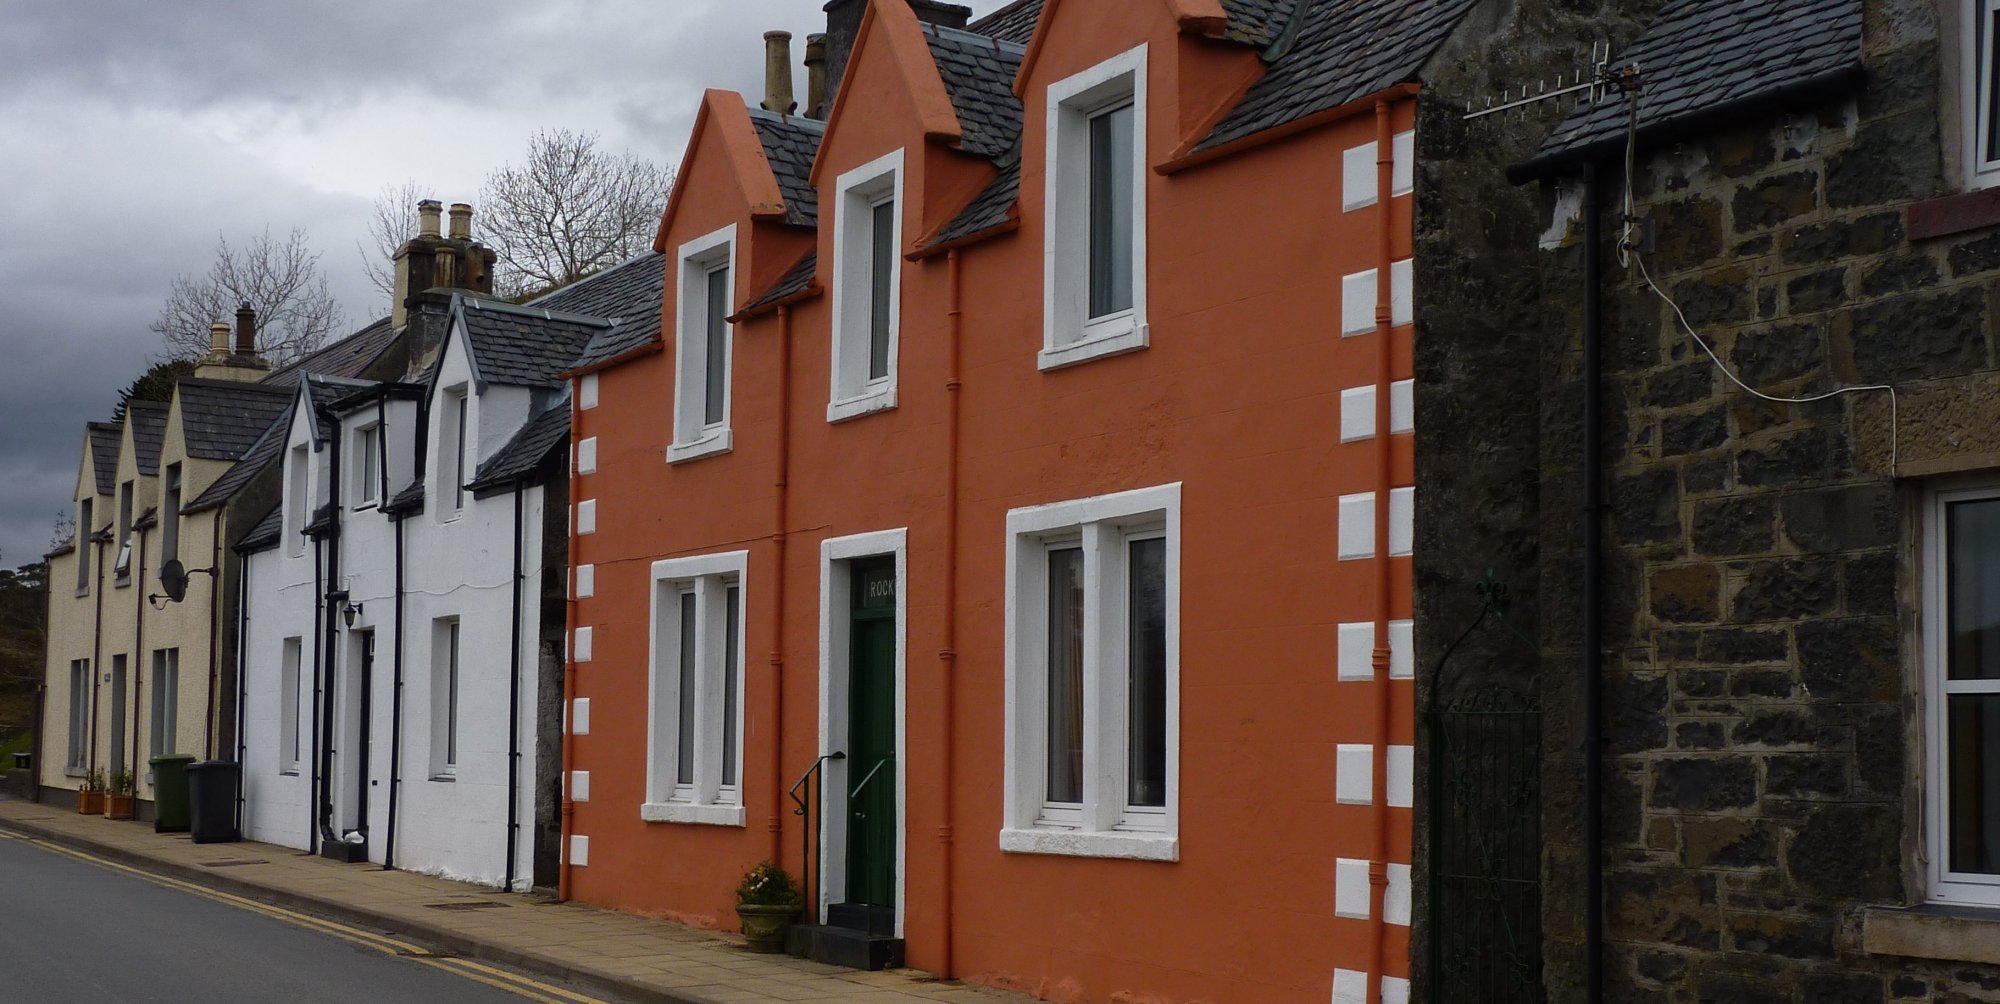 More houses in Portree